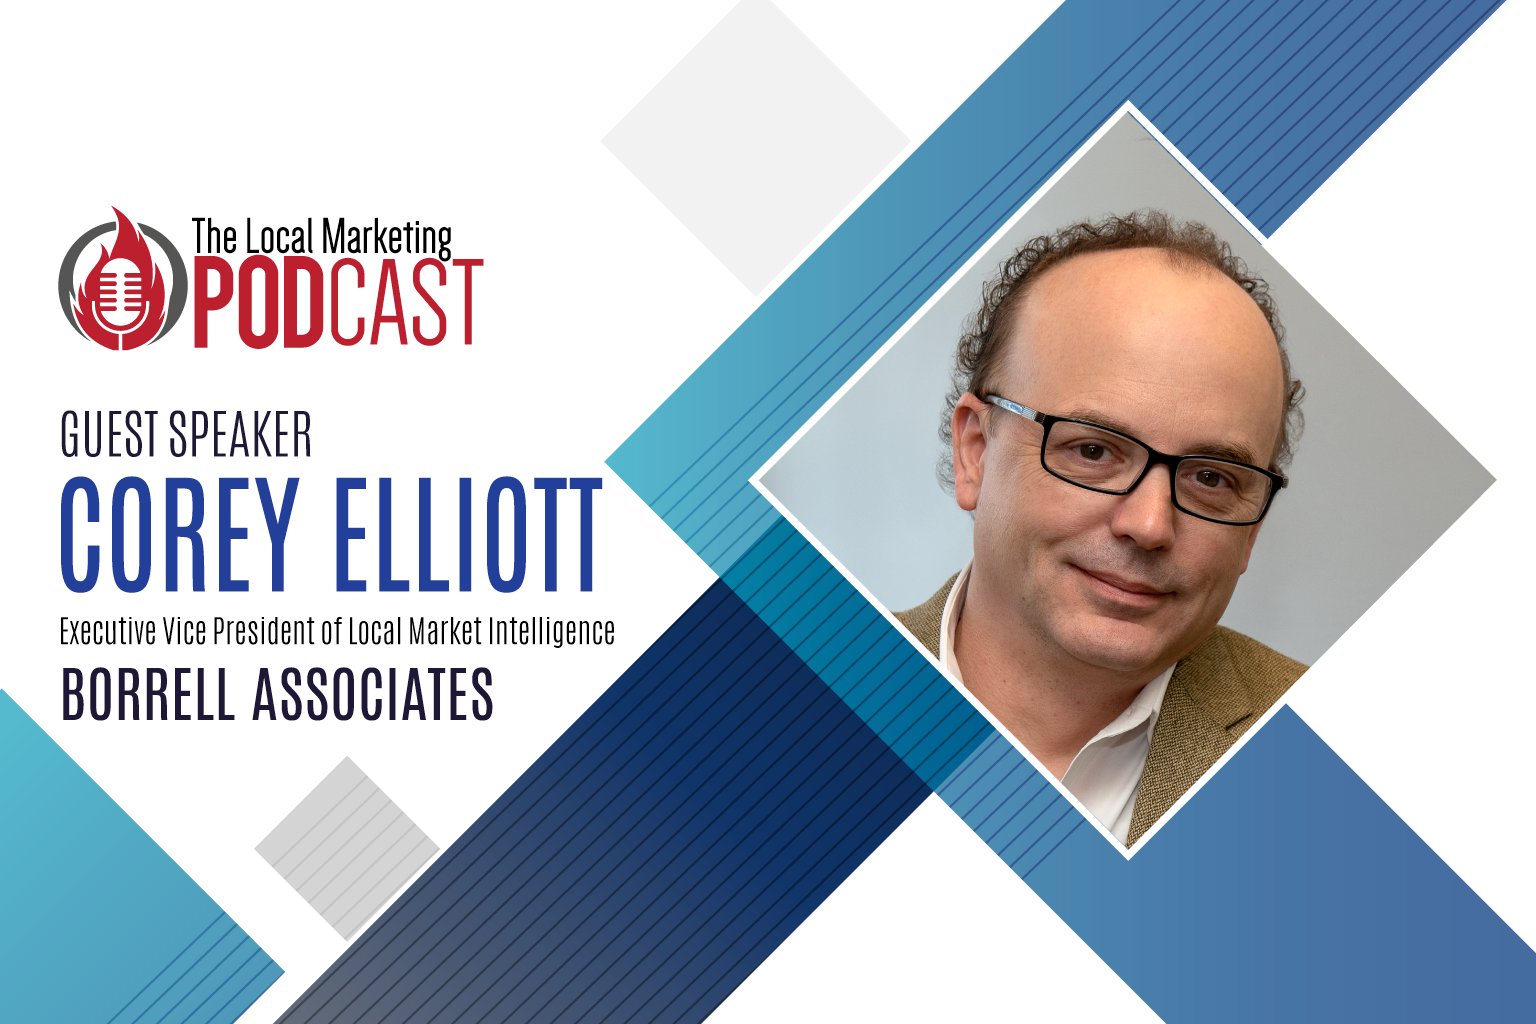 Welcome Corey Elliott to The Local Marketing Podcast—Episode 05